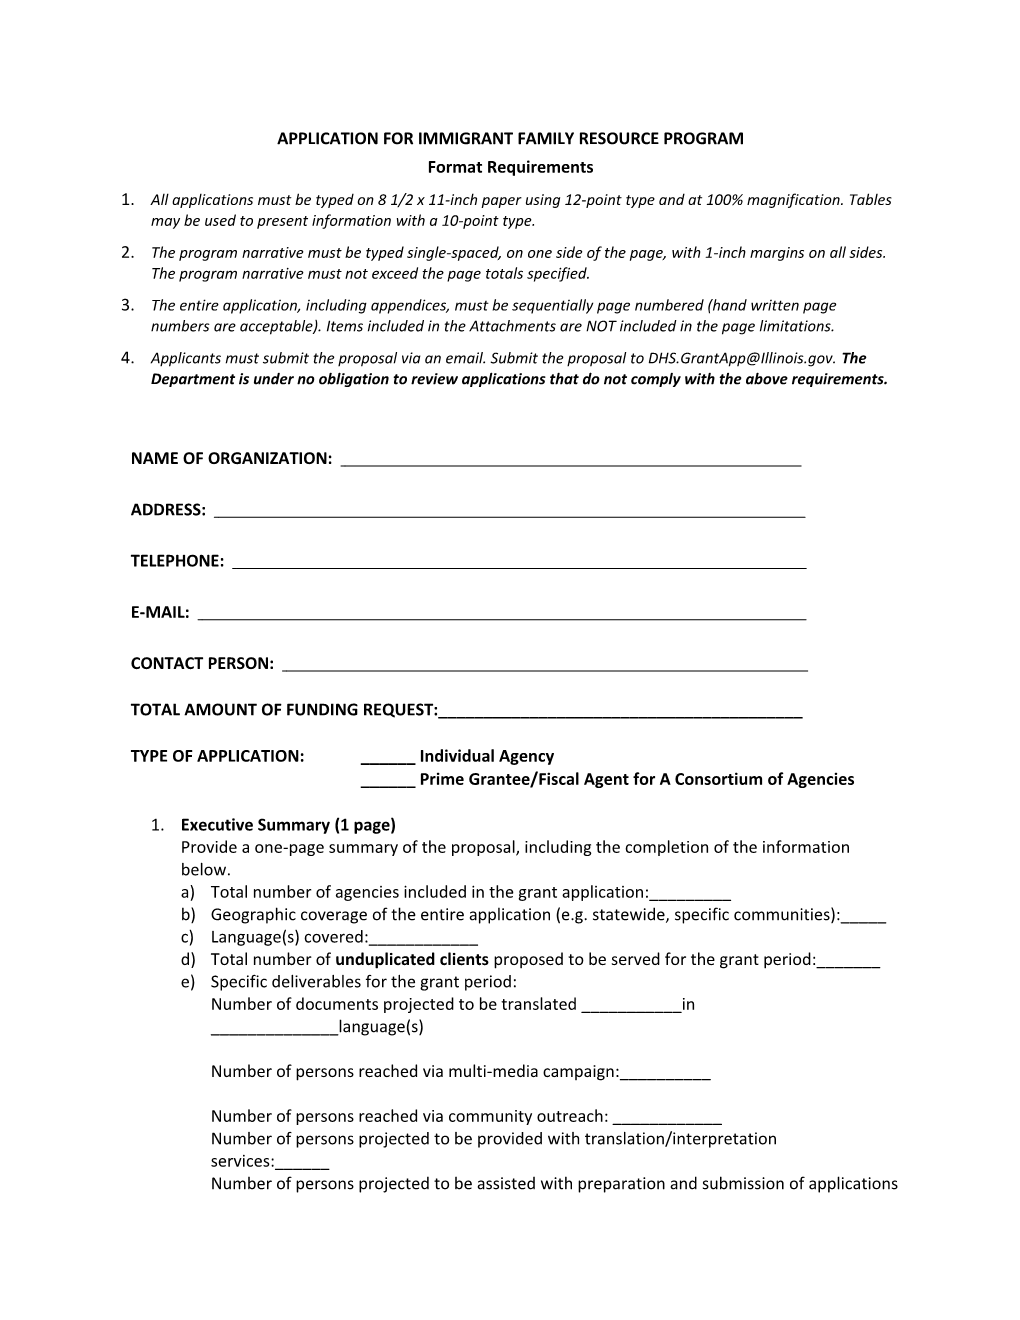 Application for Immigrant Family Resource Program